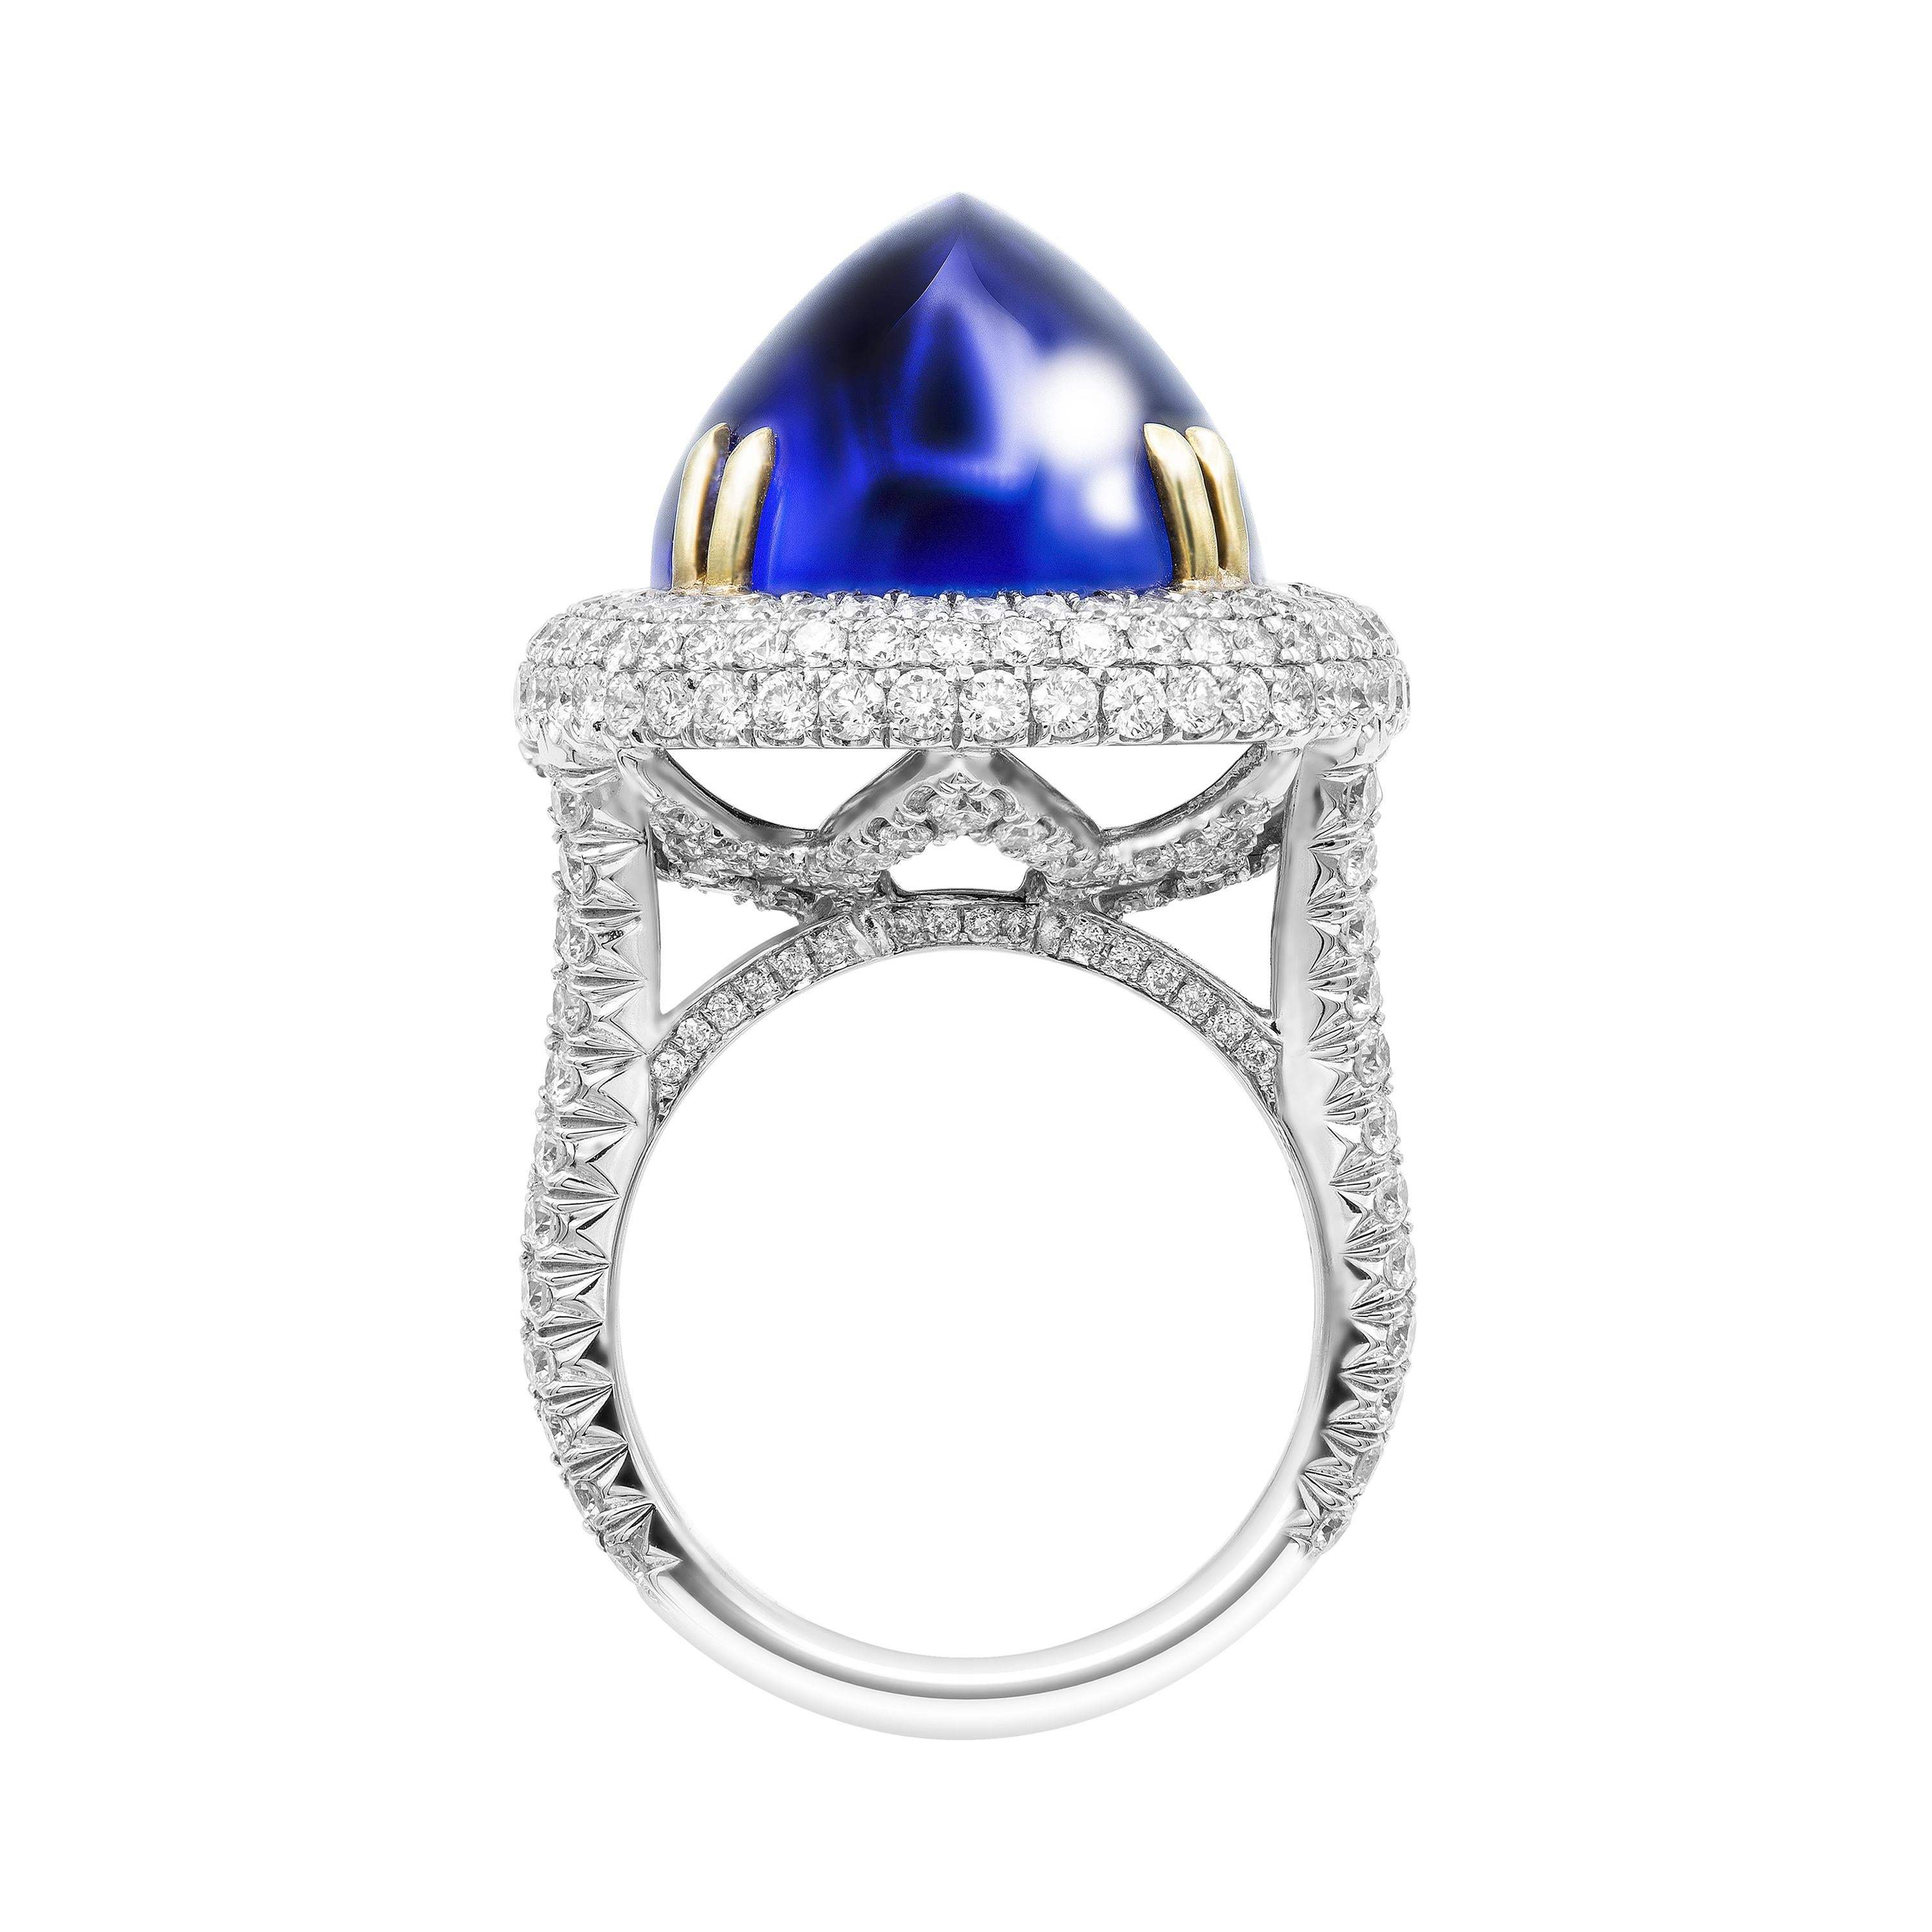 GIA Certified 26.37 Carat Oval Tanzanite Cabochon Diamond Cocktail Ring
Crafted in 18K White Gold & 18K Yellow Gold prongs

Size 6 (can be sized)

A Exceptional Handmade Statement piece, 18k White Gold High-Domed , 